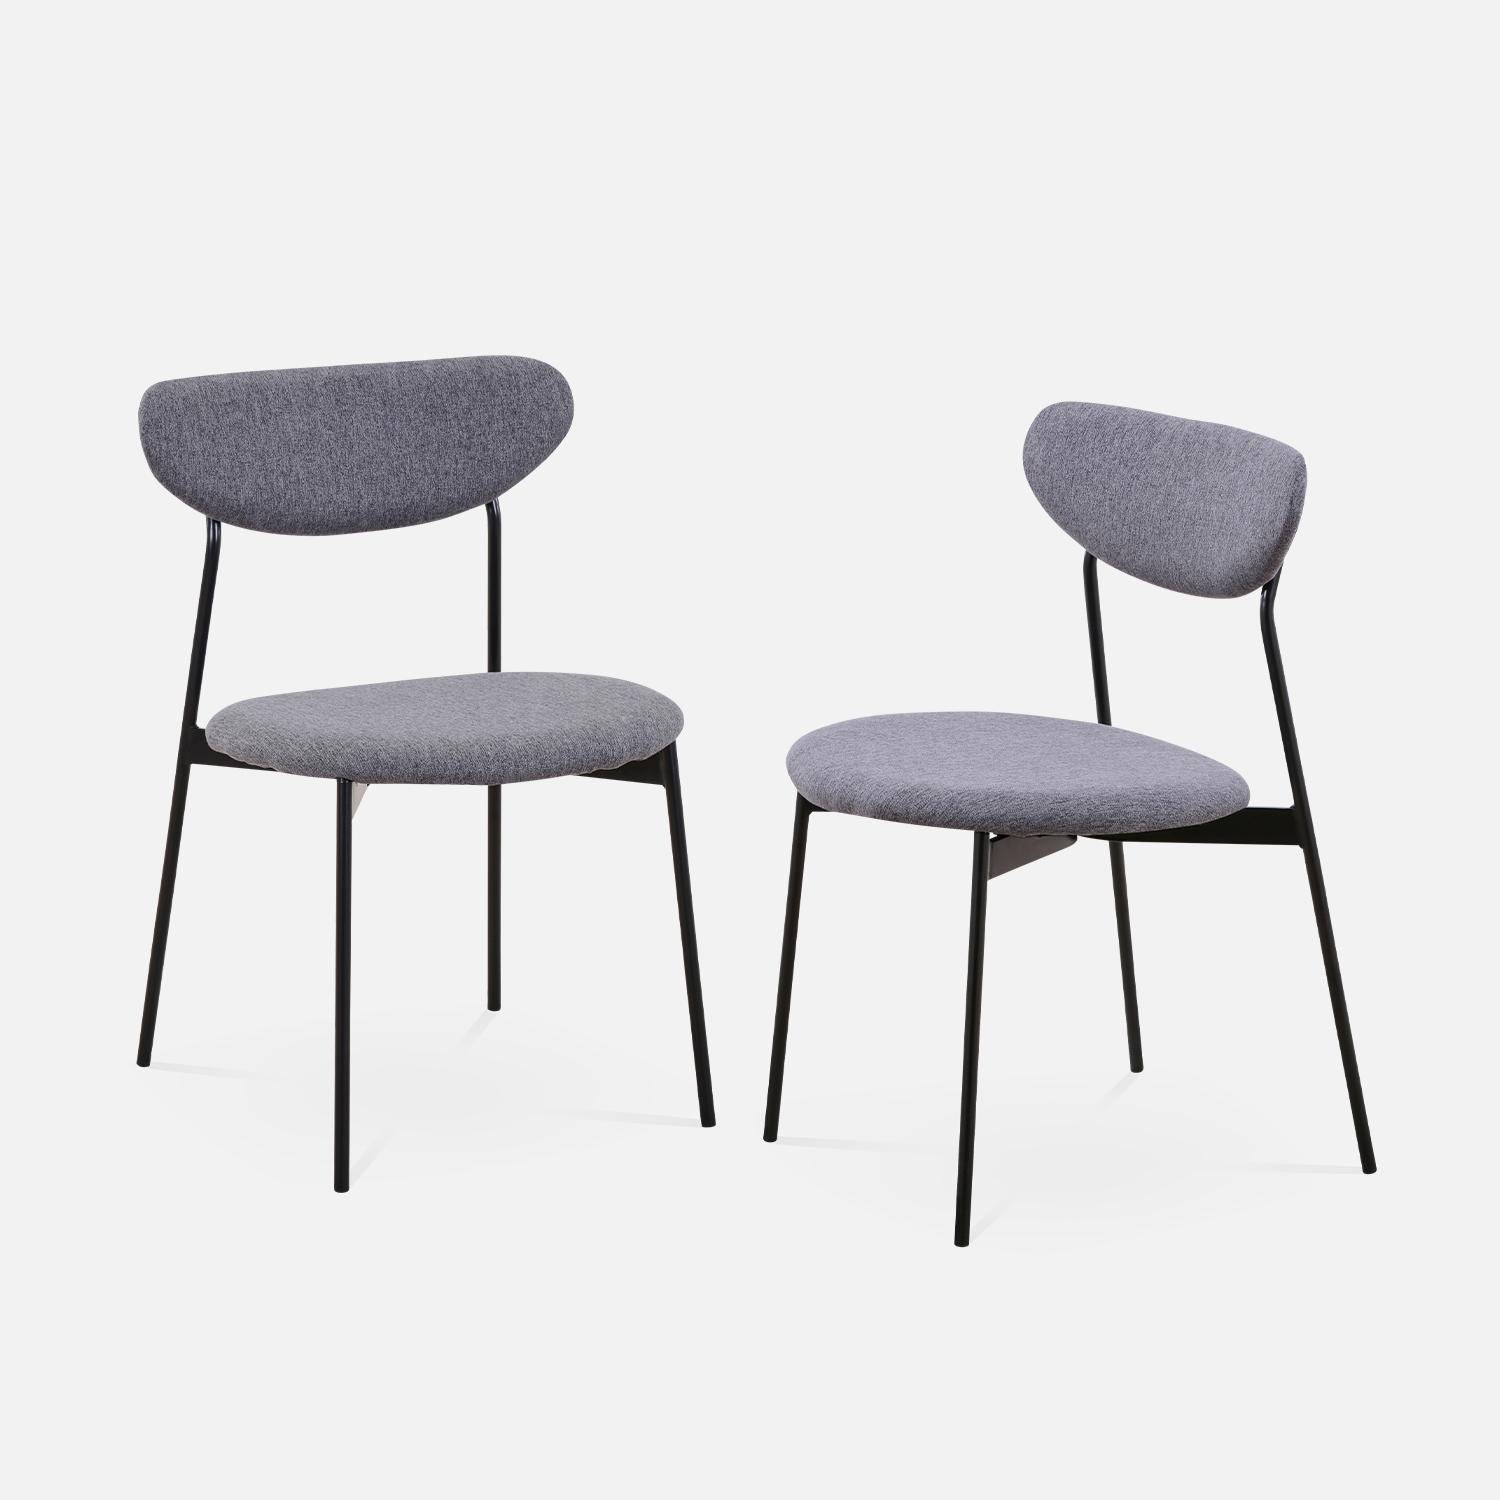 Set of 2 retro style dining chairs with steel legs - Arty - Dark Grey,sweeek,Photo3